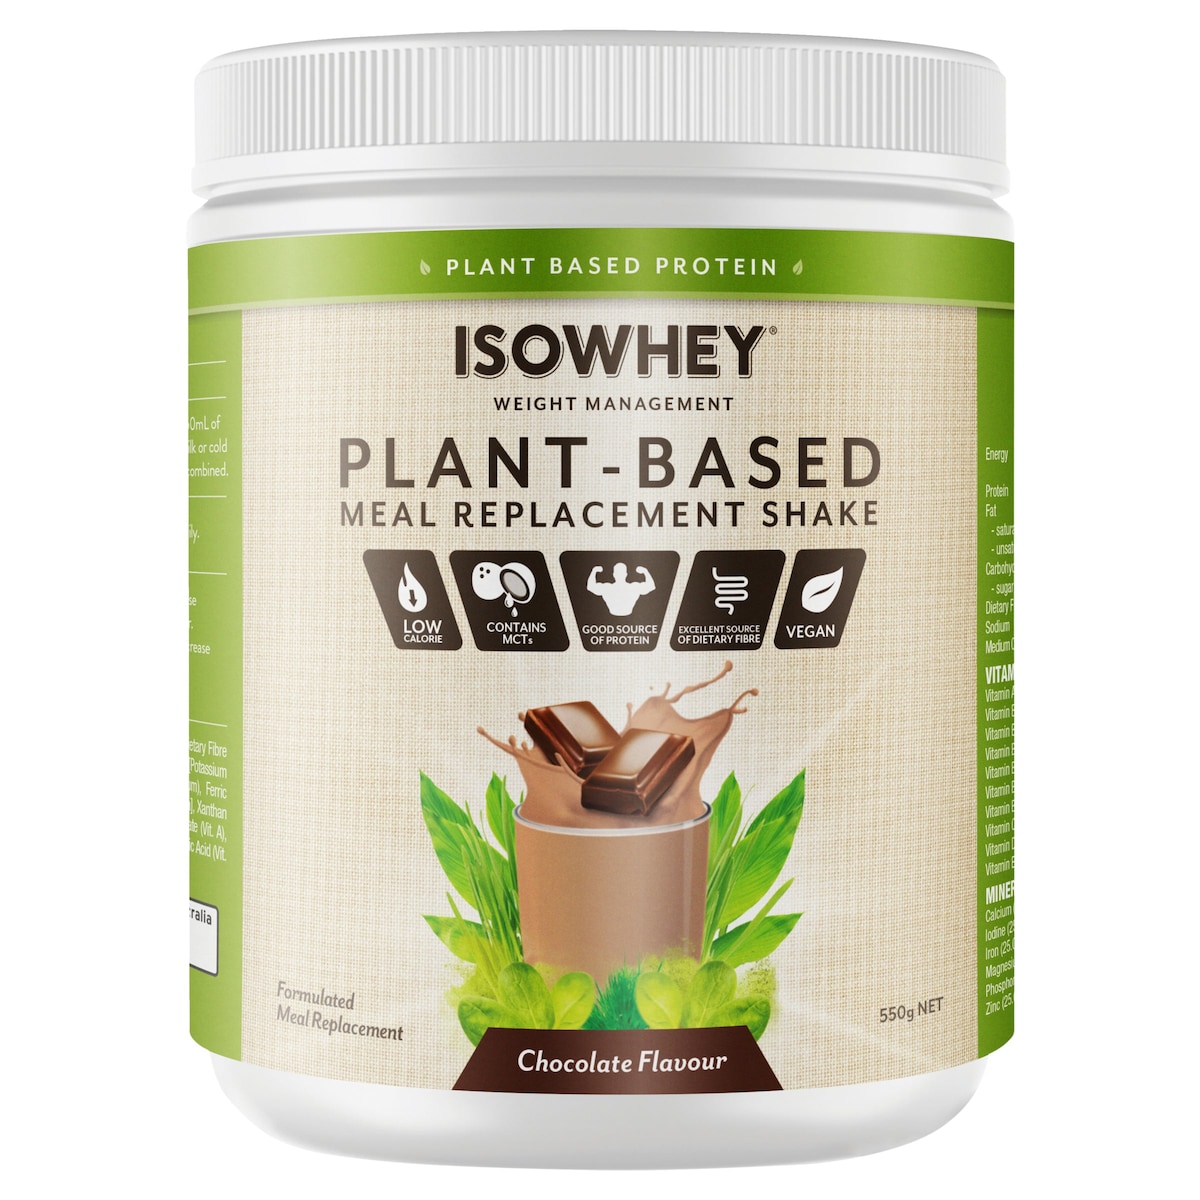 IsoWhey Plant-Based Meal Replacement Shake Chocolate 550g Australia